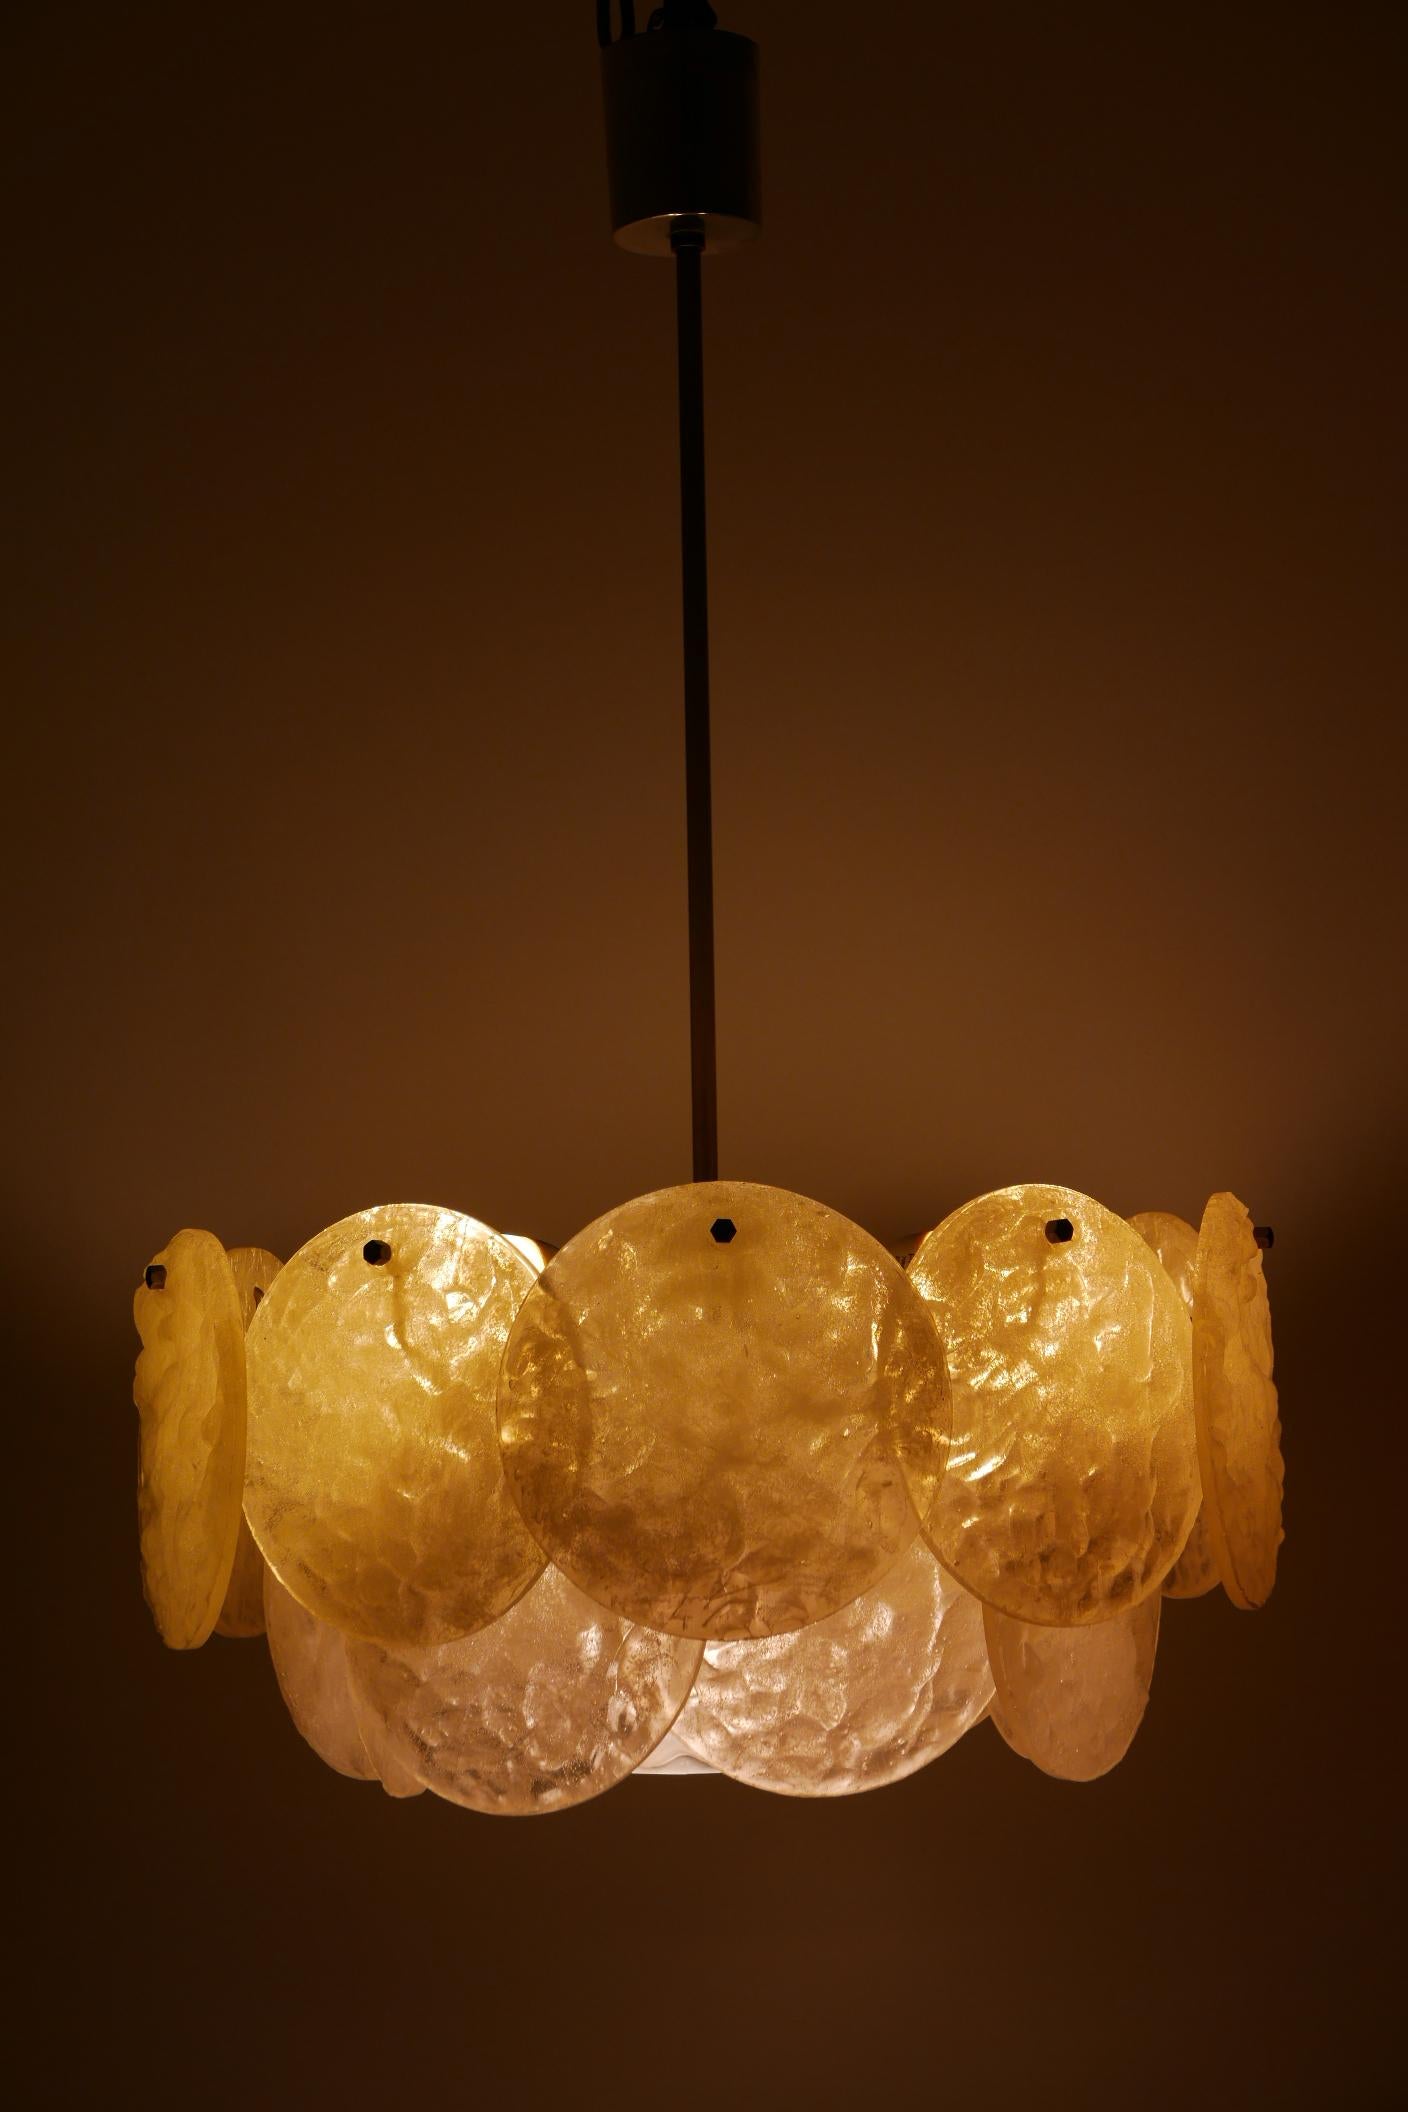 Mid-Century Modern Chandelier or Pendant Lamp with Textured Acrylic Discs, 1960s For Sale 2